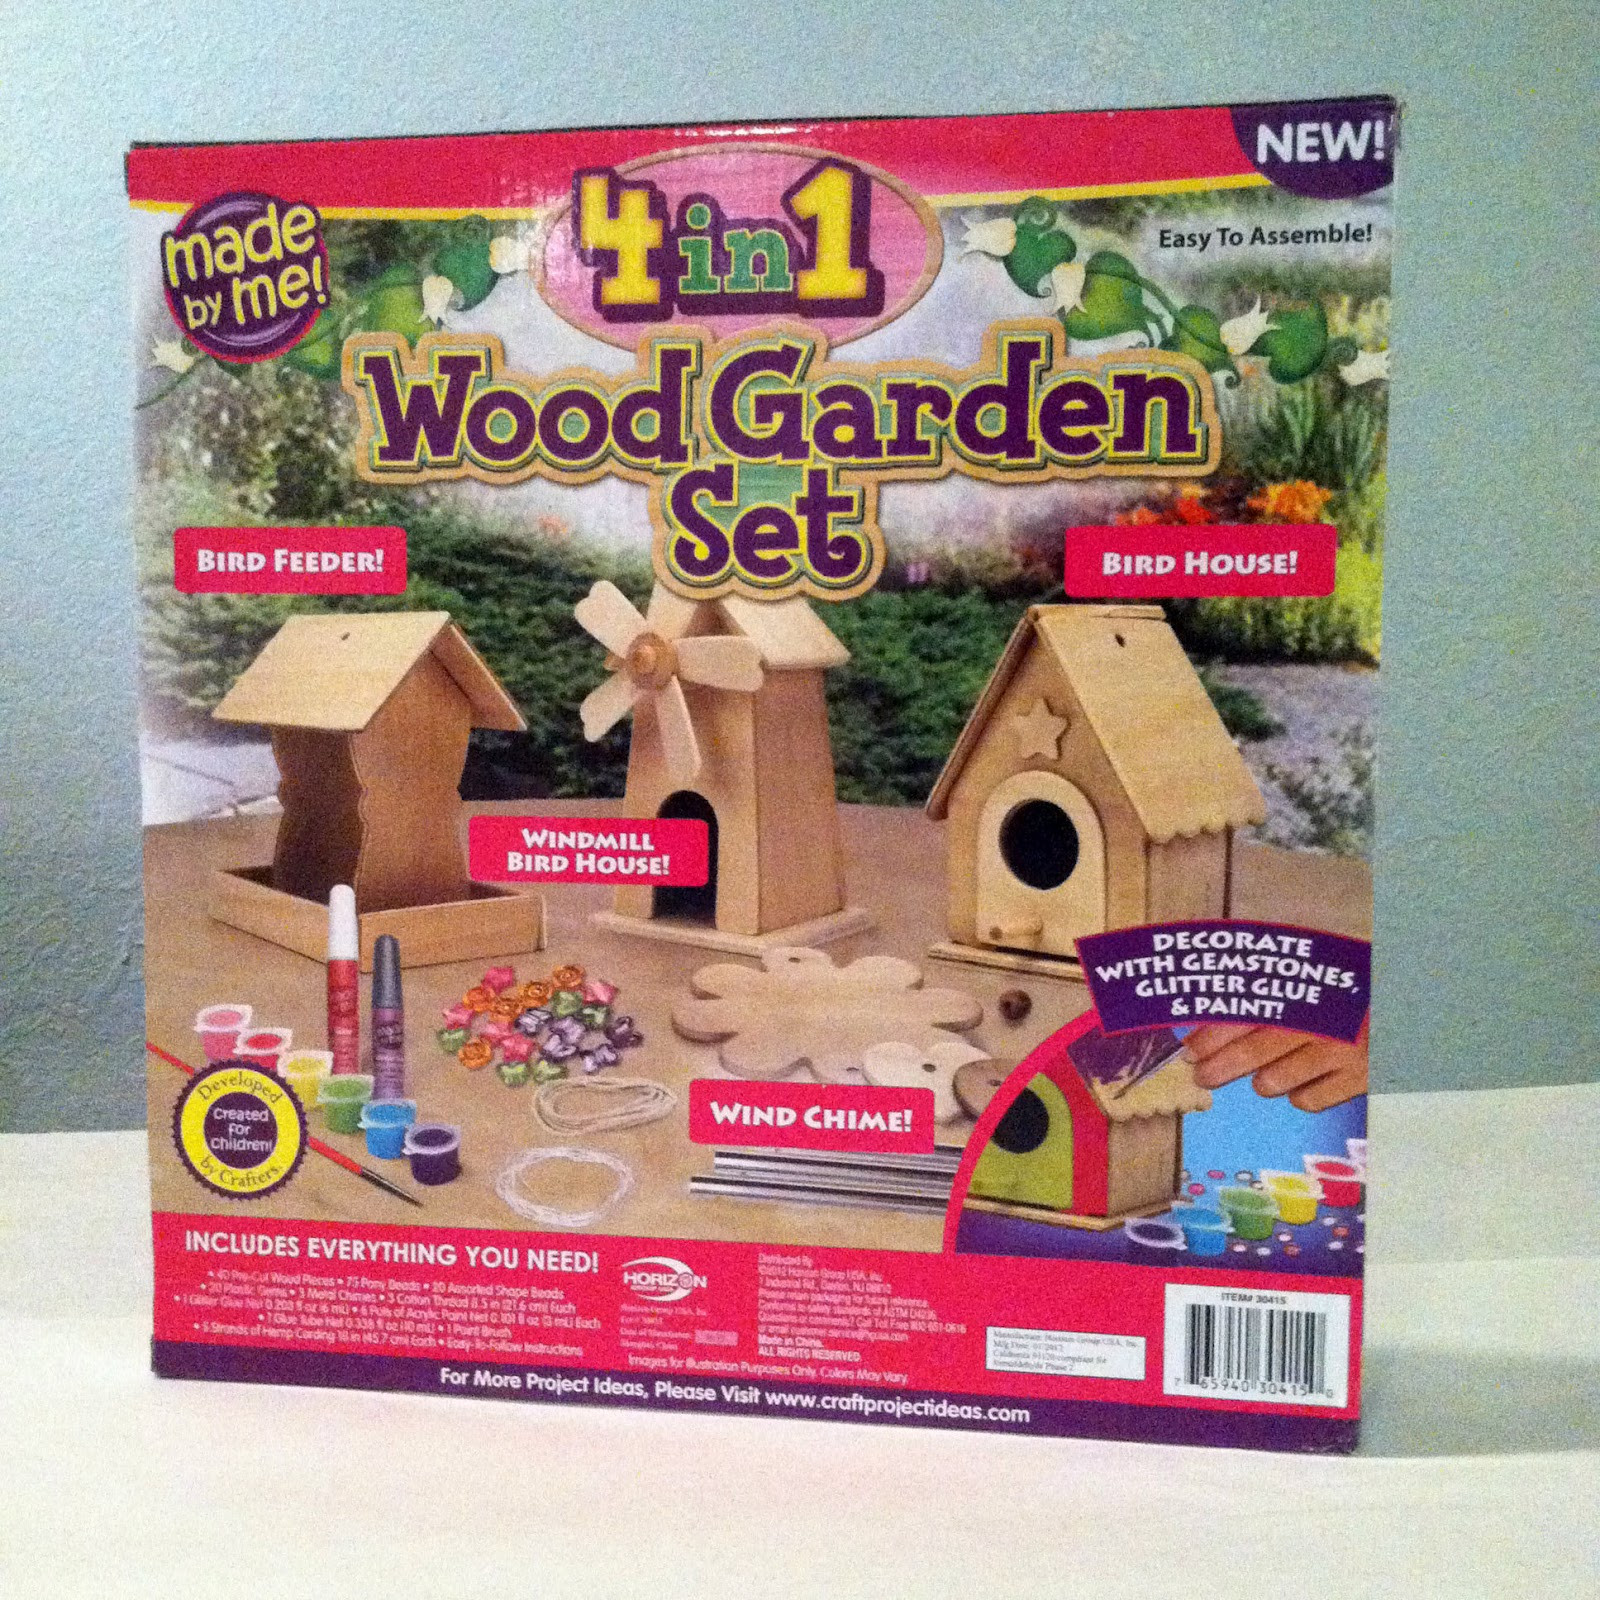 Wood Craft Kits For Kids
 Wood Garden Set Craft Kit for Kids Summer Fun from